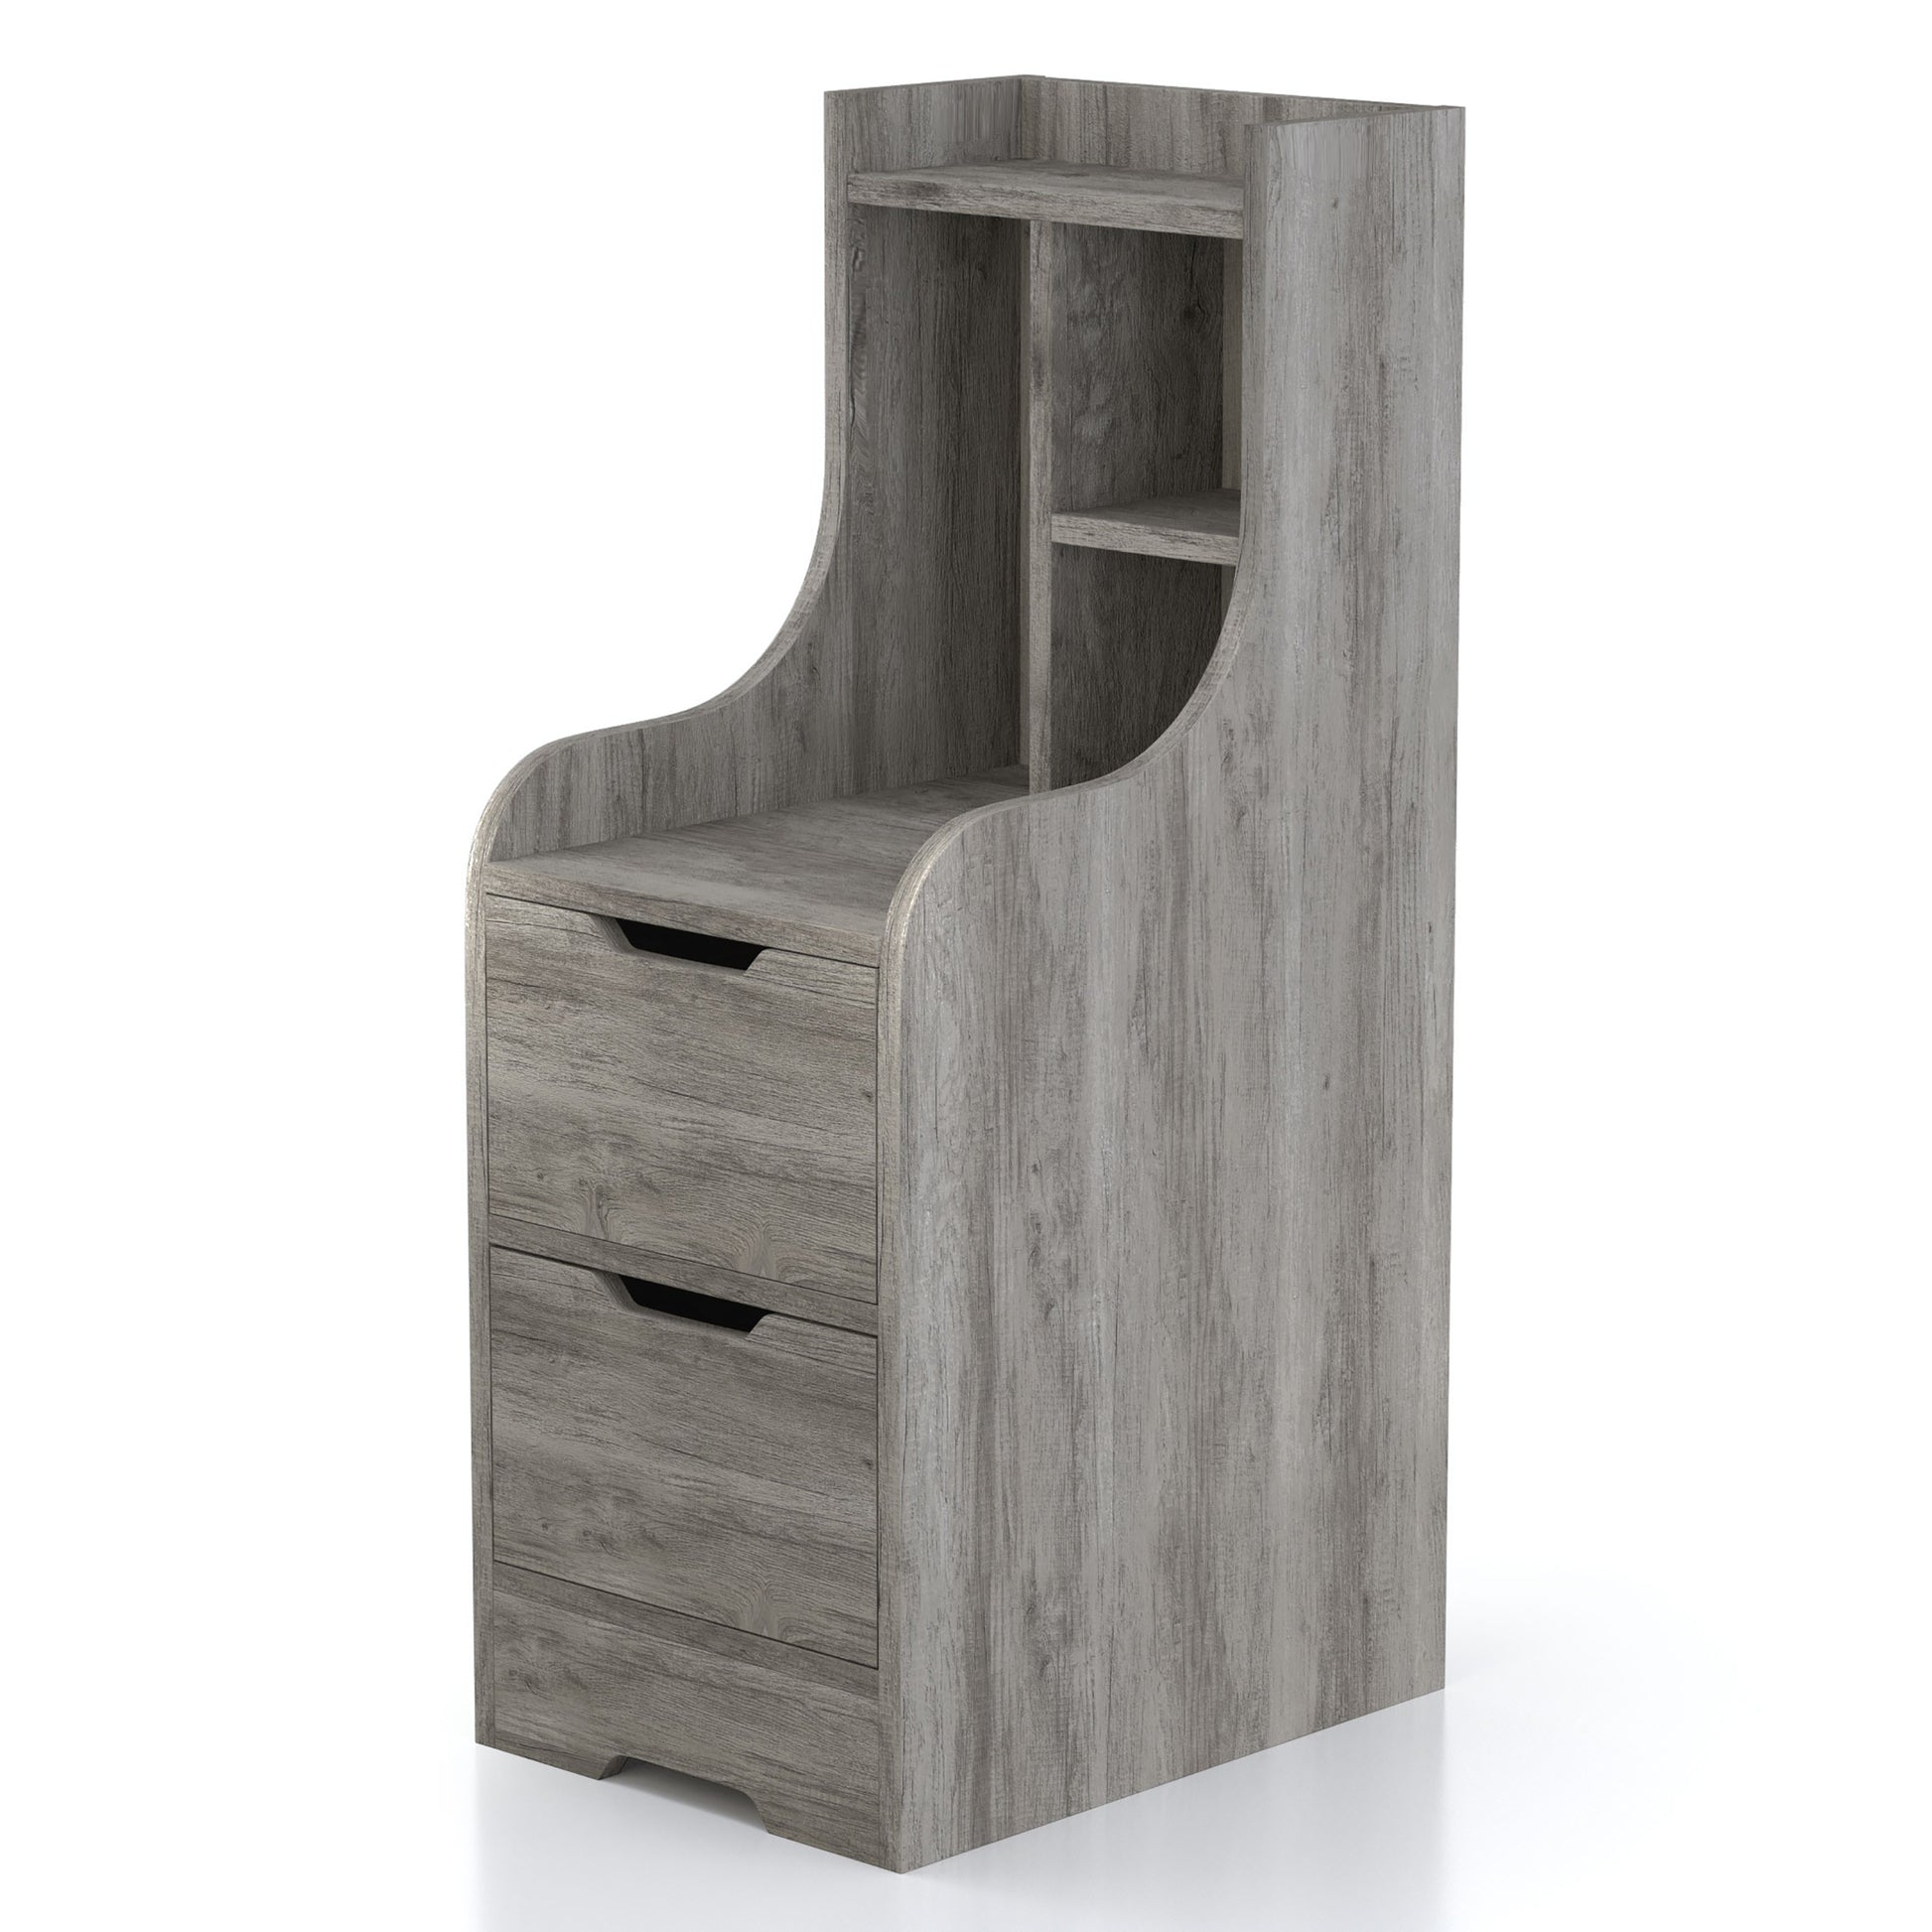 Left angled modern vintage gray oak two-drawer nightstand with shelves on a white background